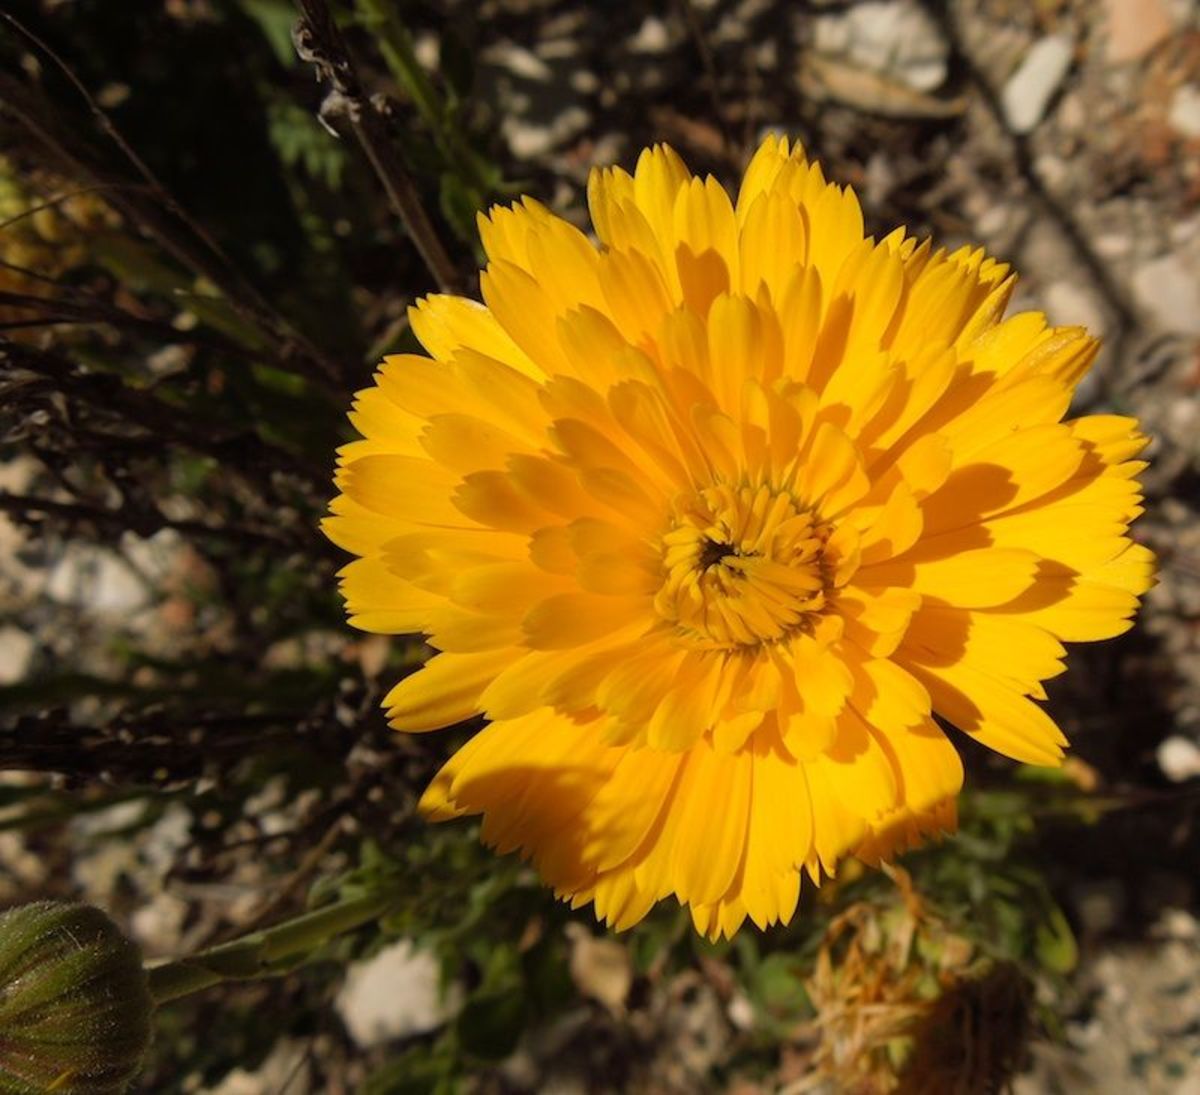 This is a perfect calendula flower in spring -- April 19, to be exact. You can click the X at the right corner of the captions to see the entire picture as it was intended to be seen.